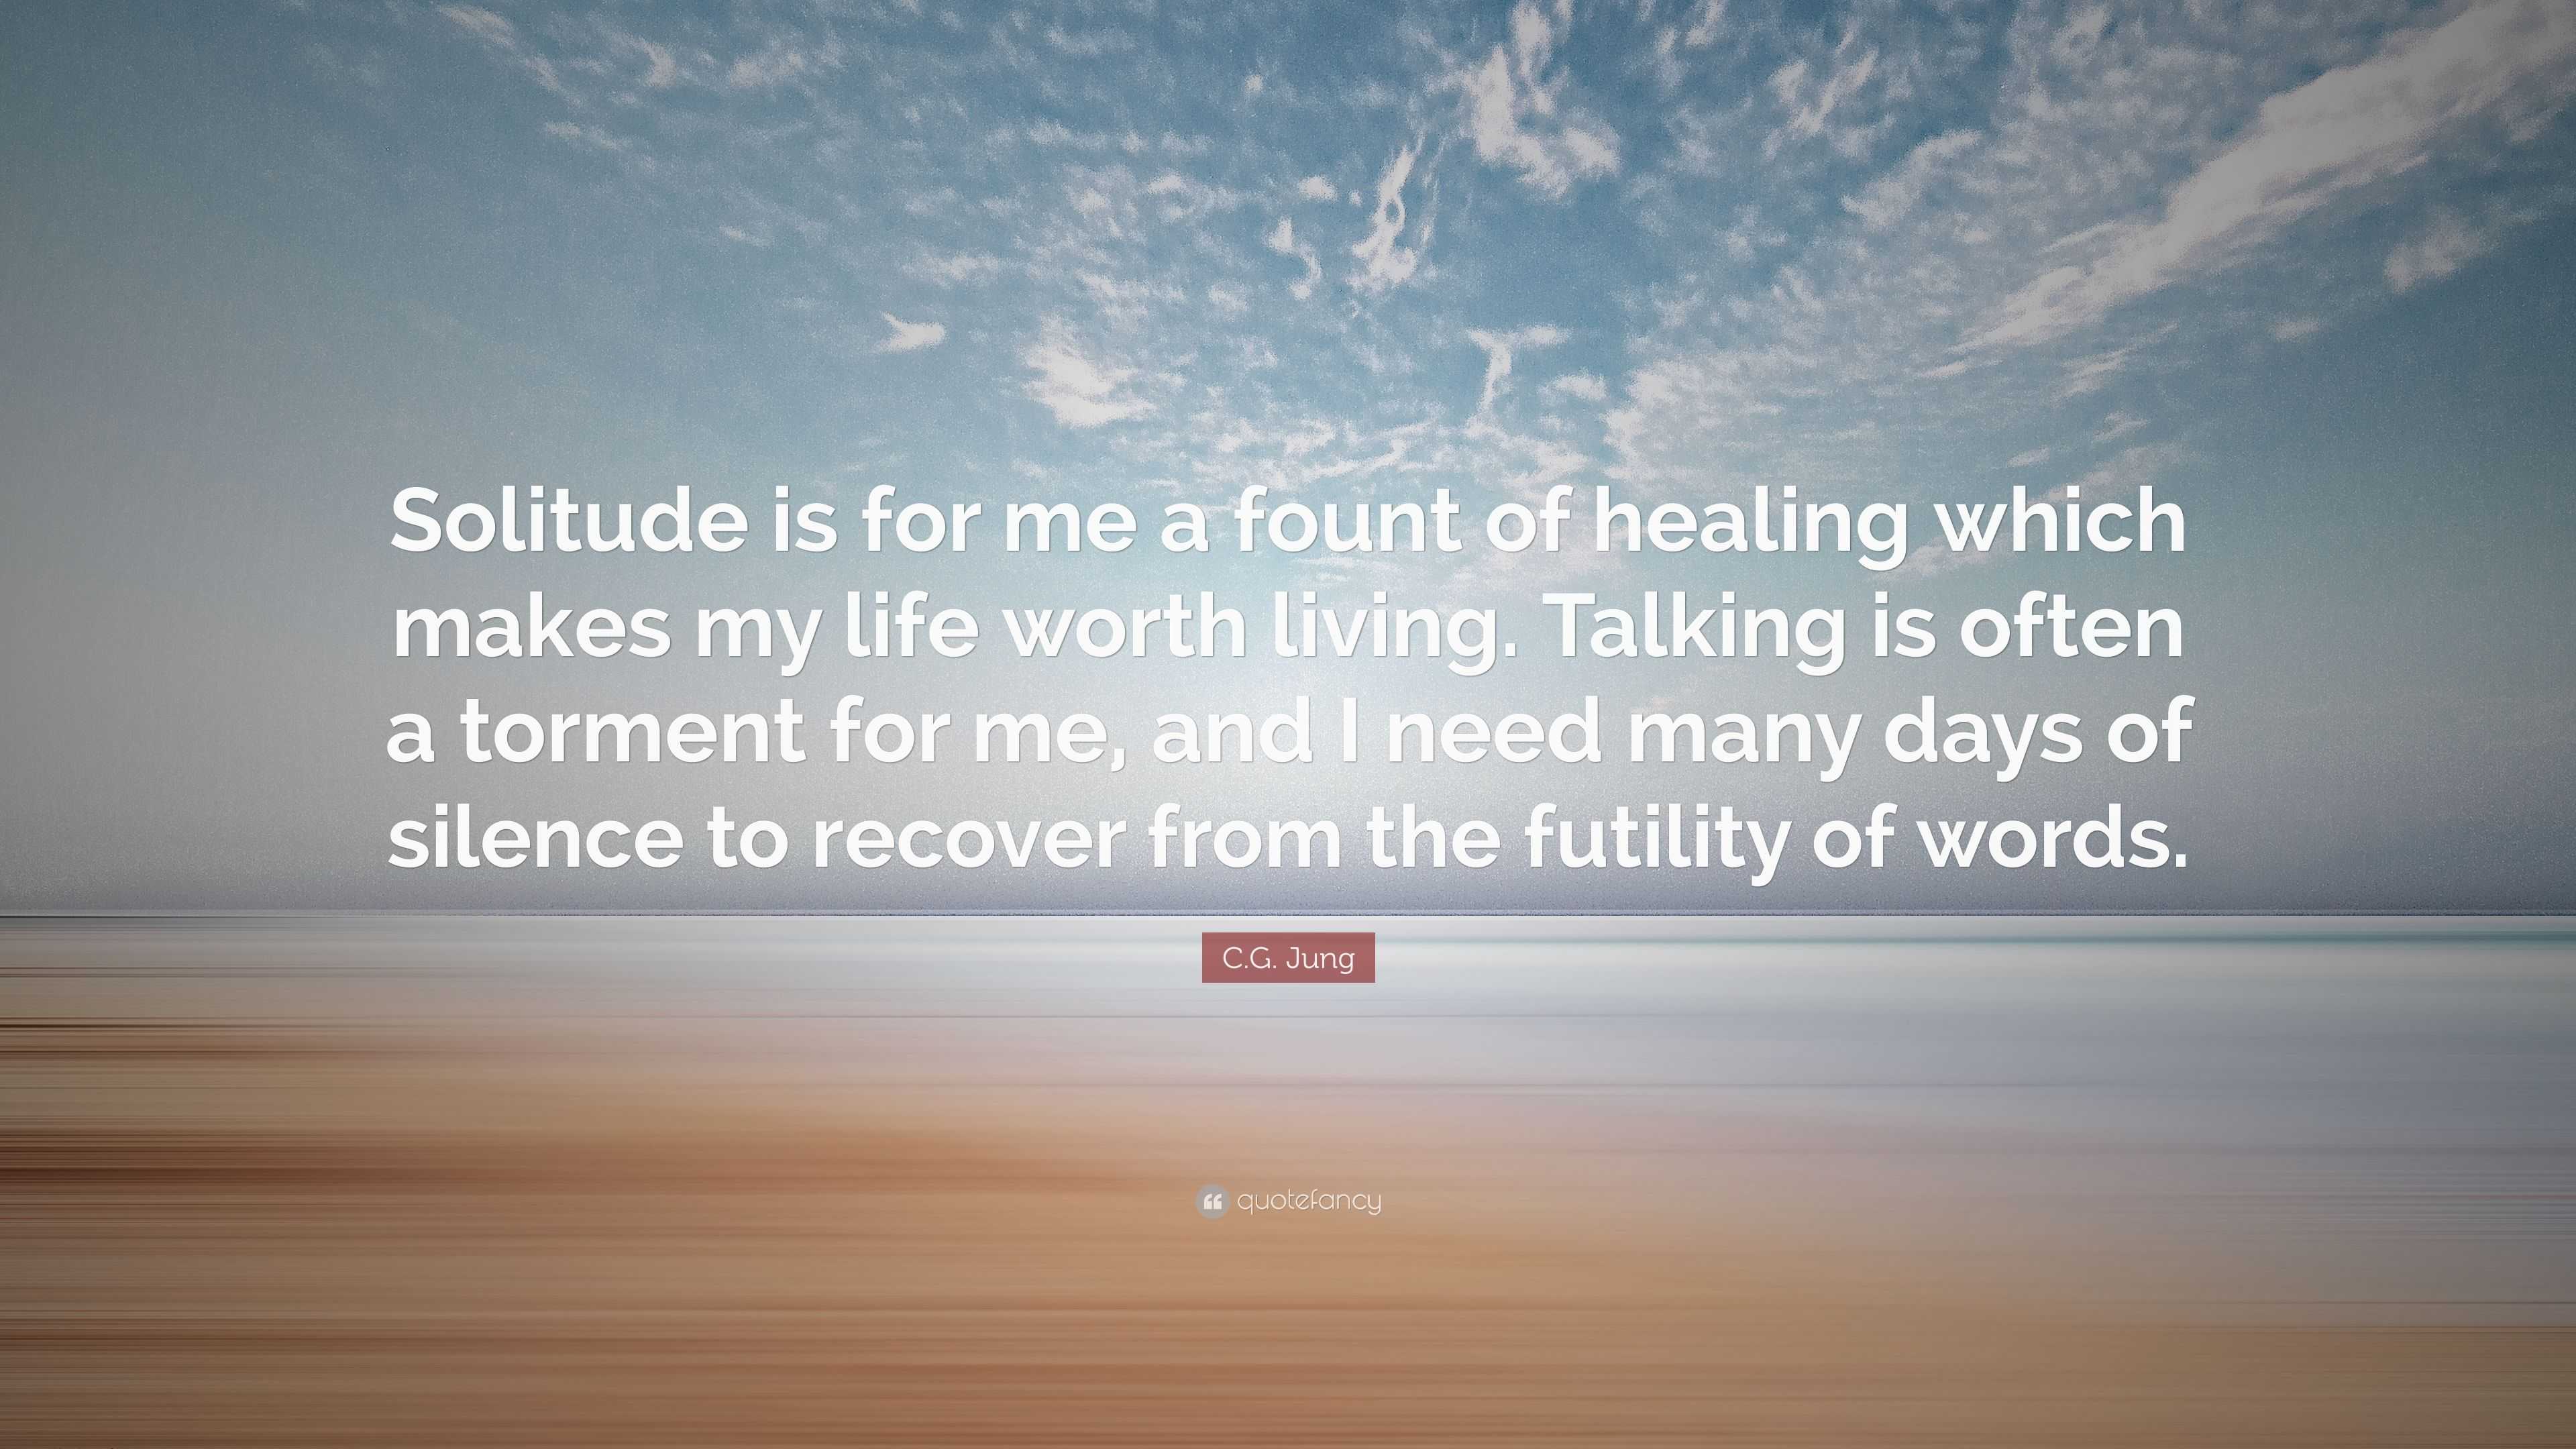 C.G. Jung Quote: “Solitude is for me a fount of healing which makes my